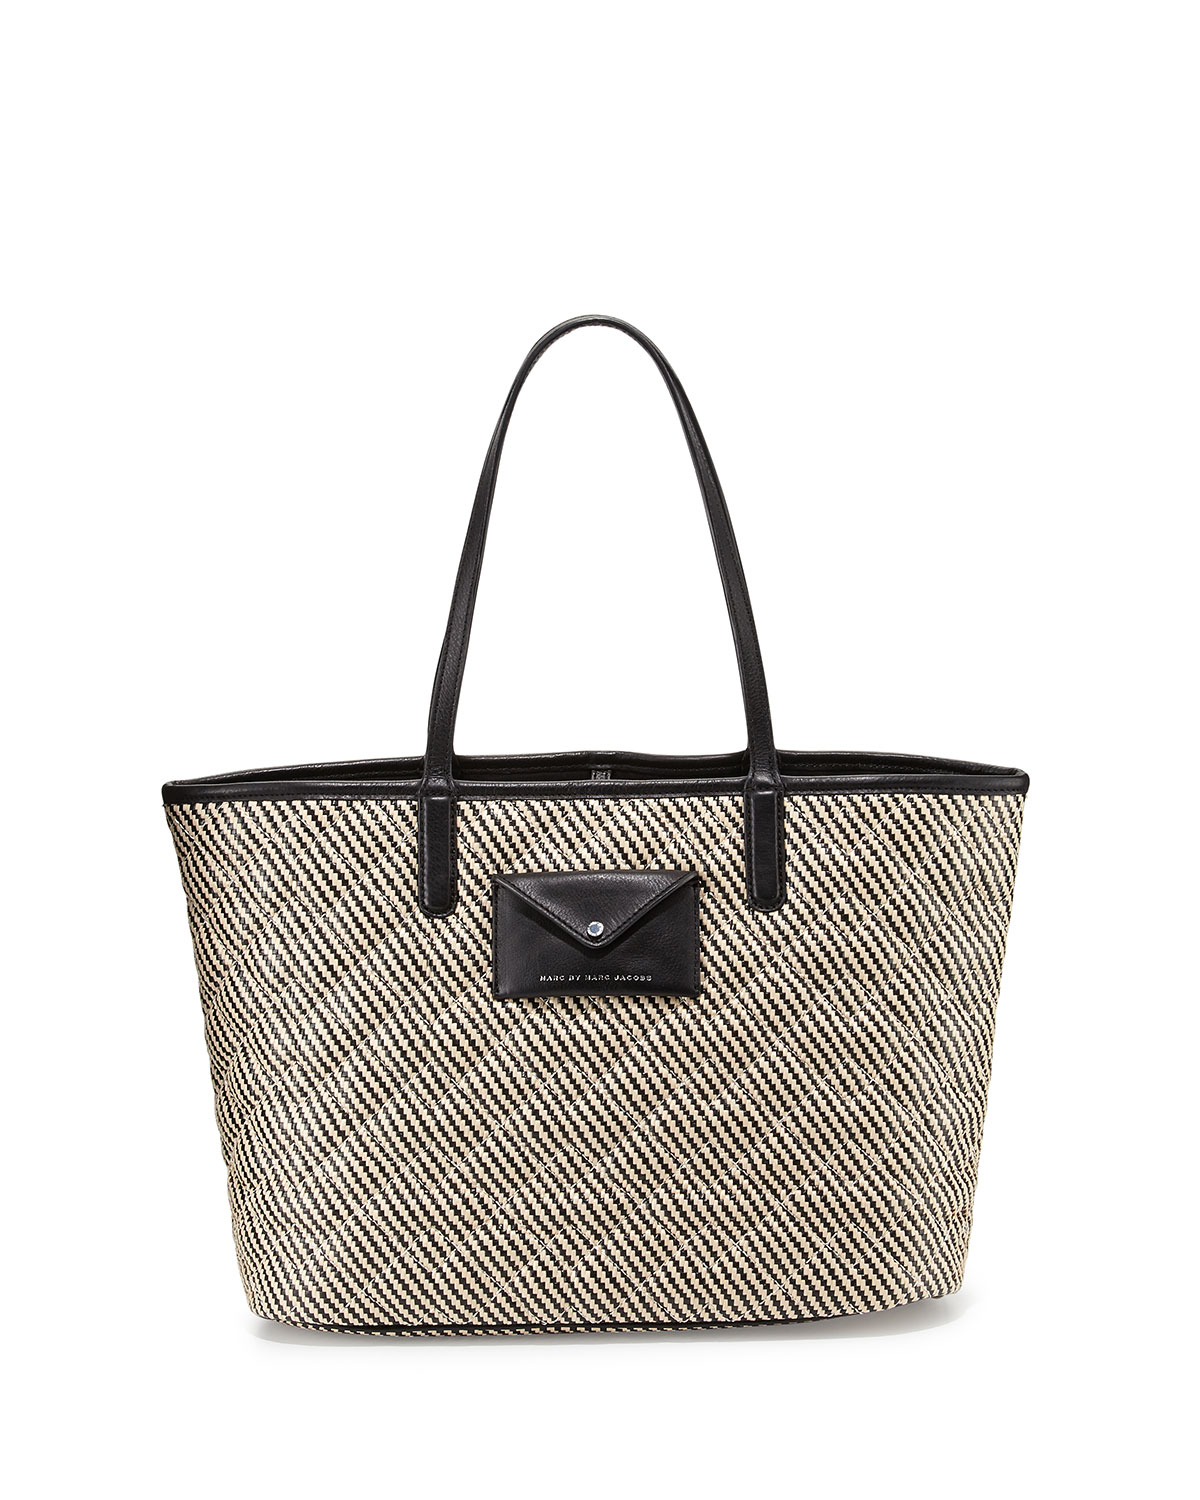 Marc By Marc Jacobs Metropolitote Straw Tote Bag in Beige (straw)